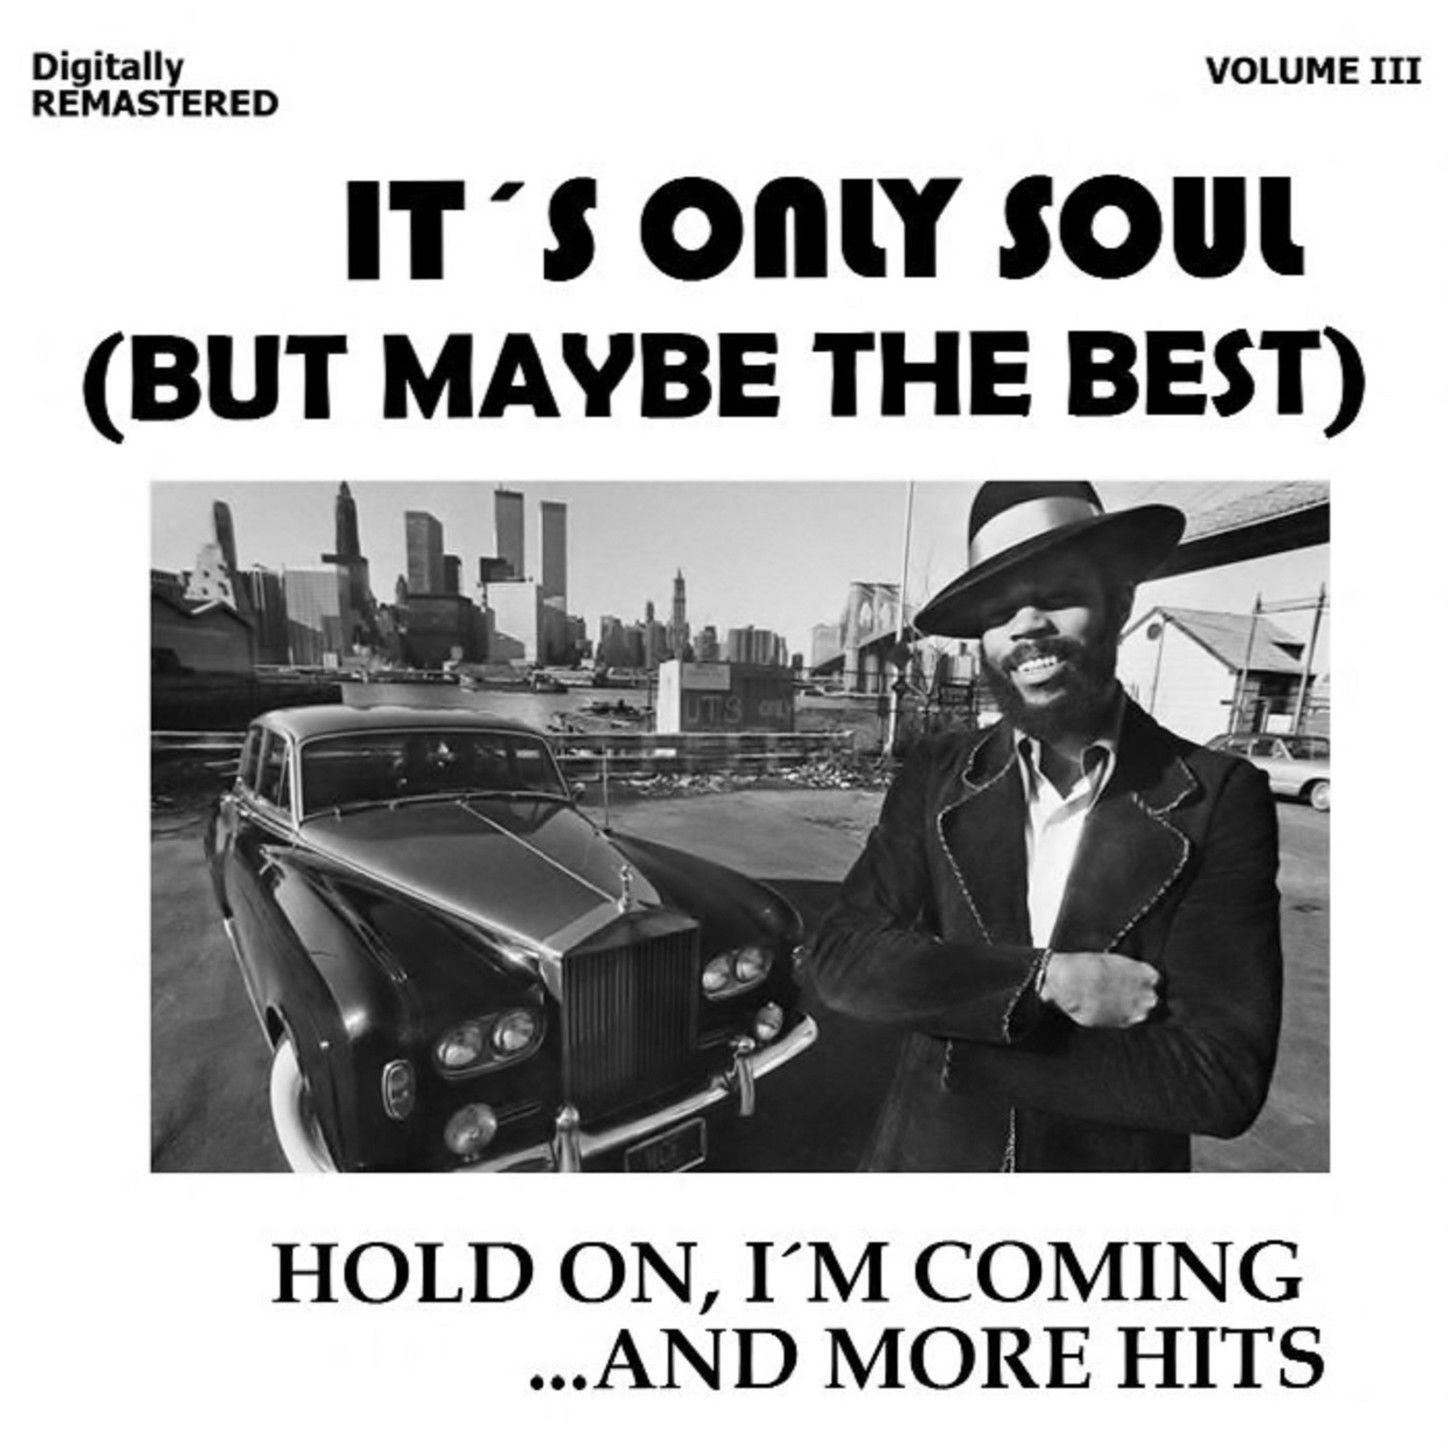 It's Only Soul [But Maybe the Best], Vol. III - Hold On, I'm Coming... and More Hits (Remastered)